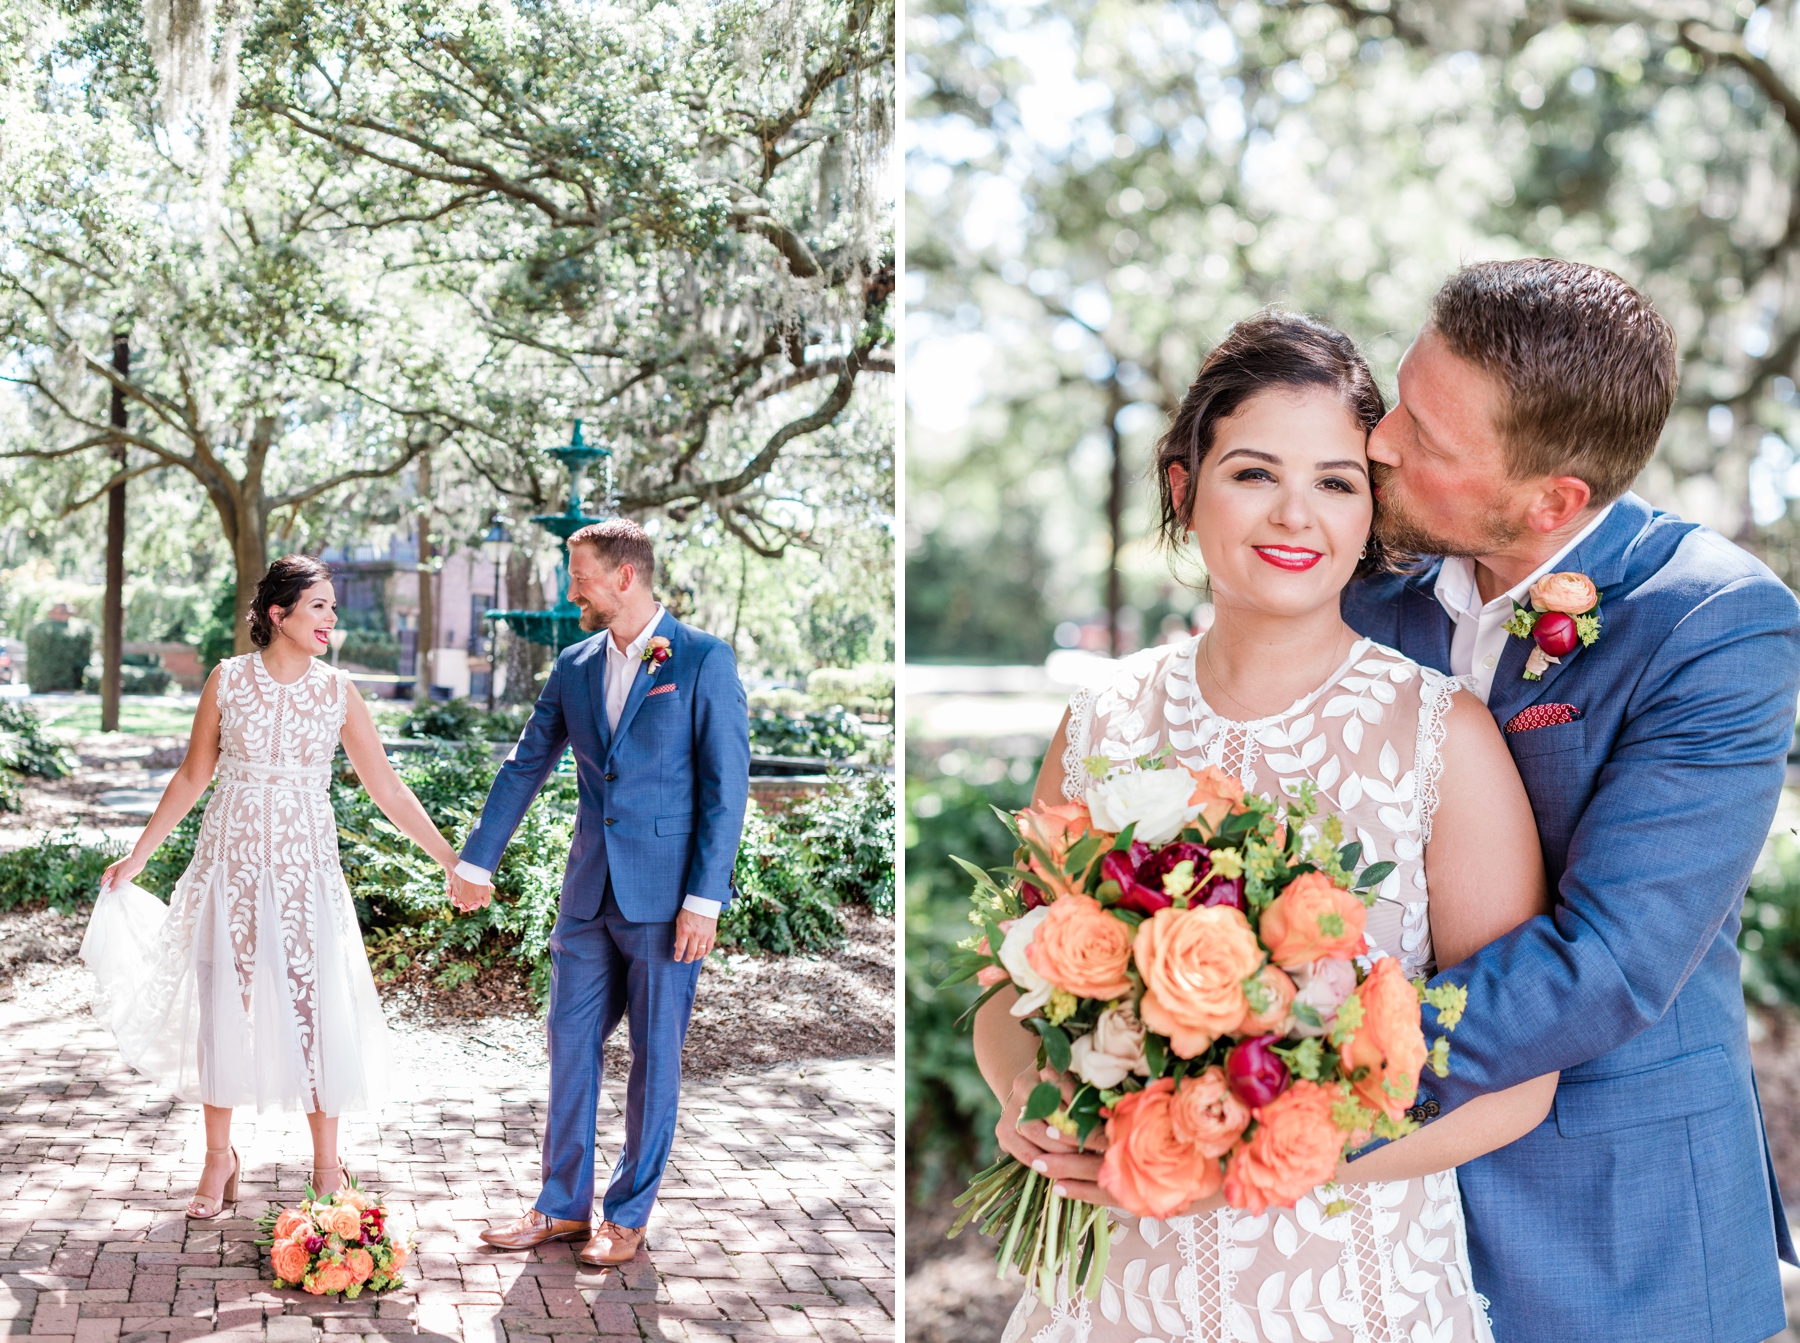 Orange, blush, and navy elopement bouquet by Ivory and Beau